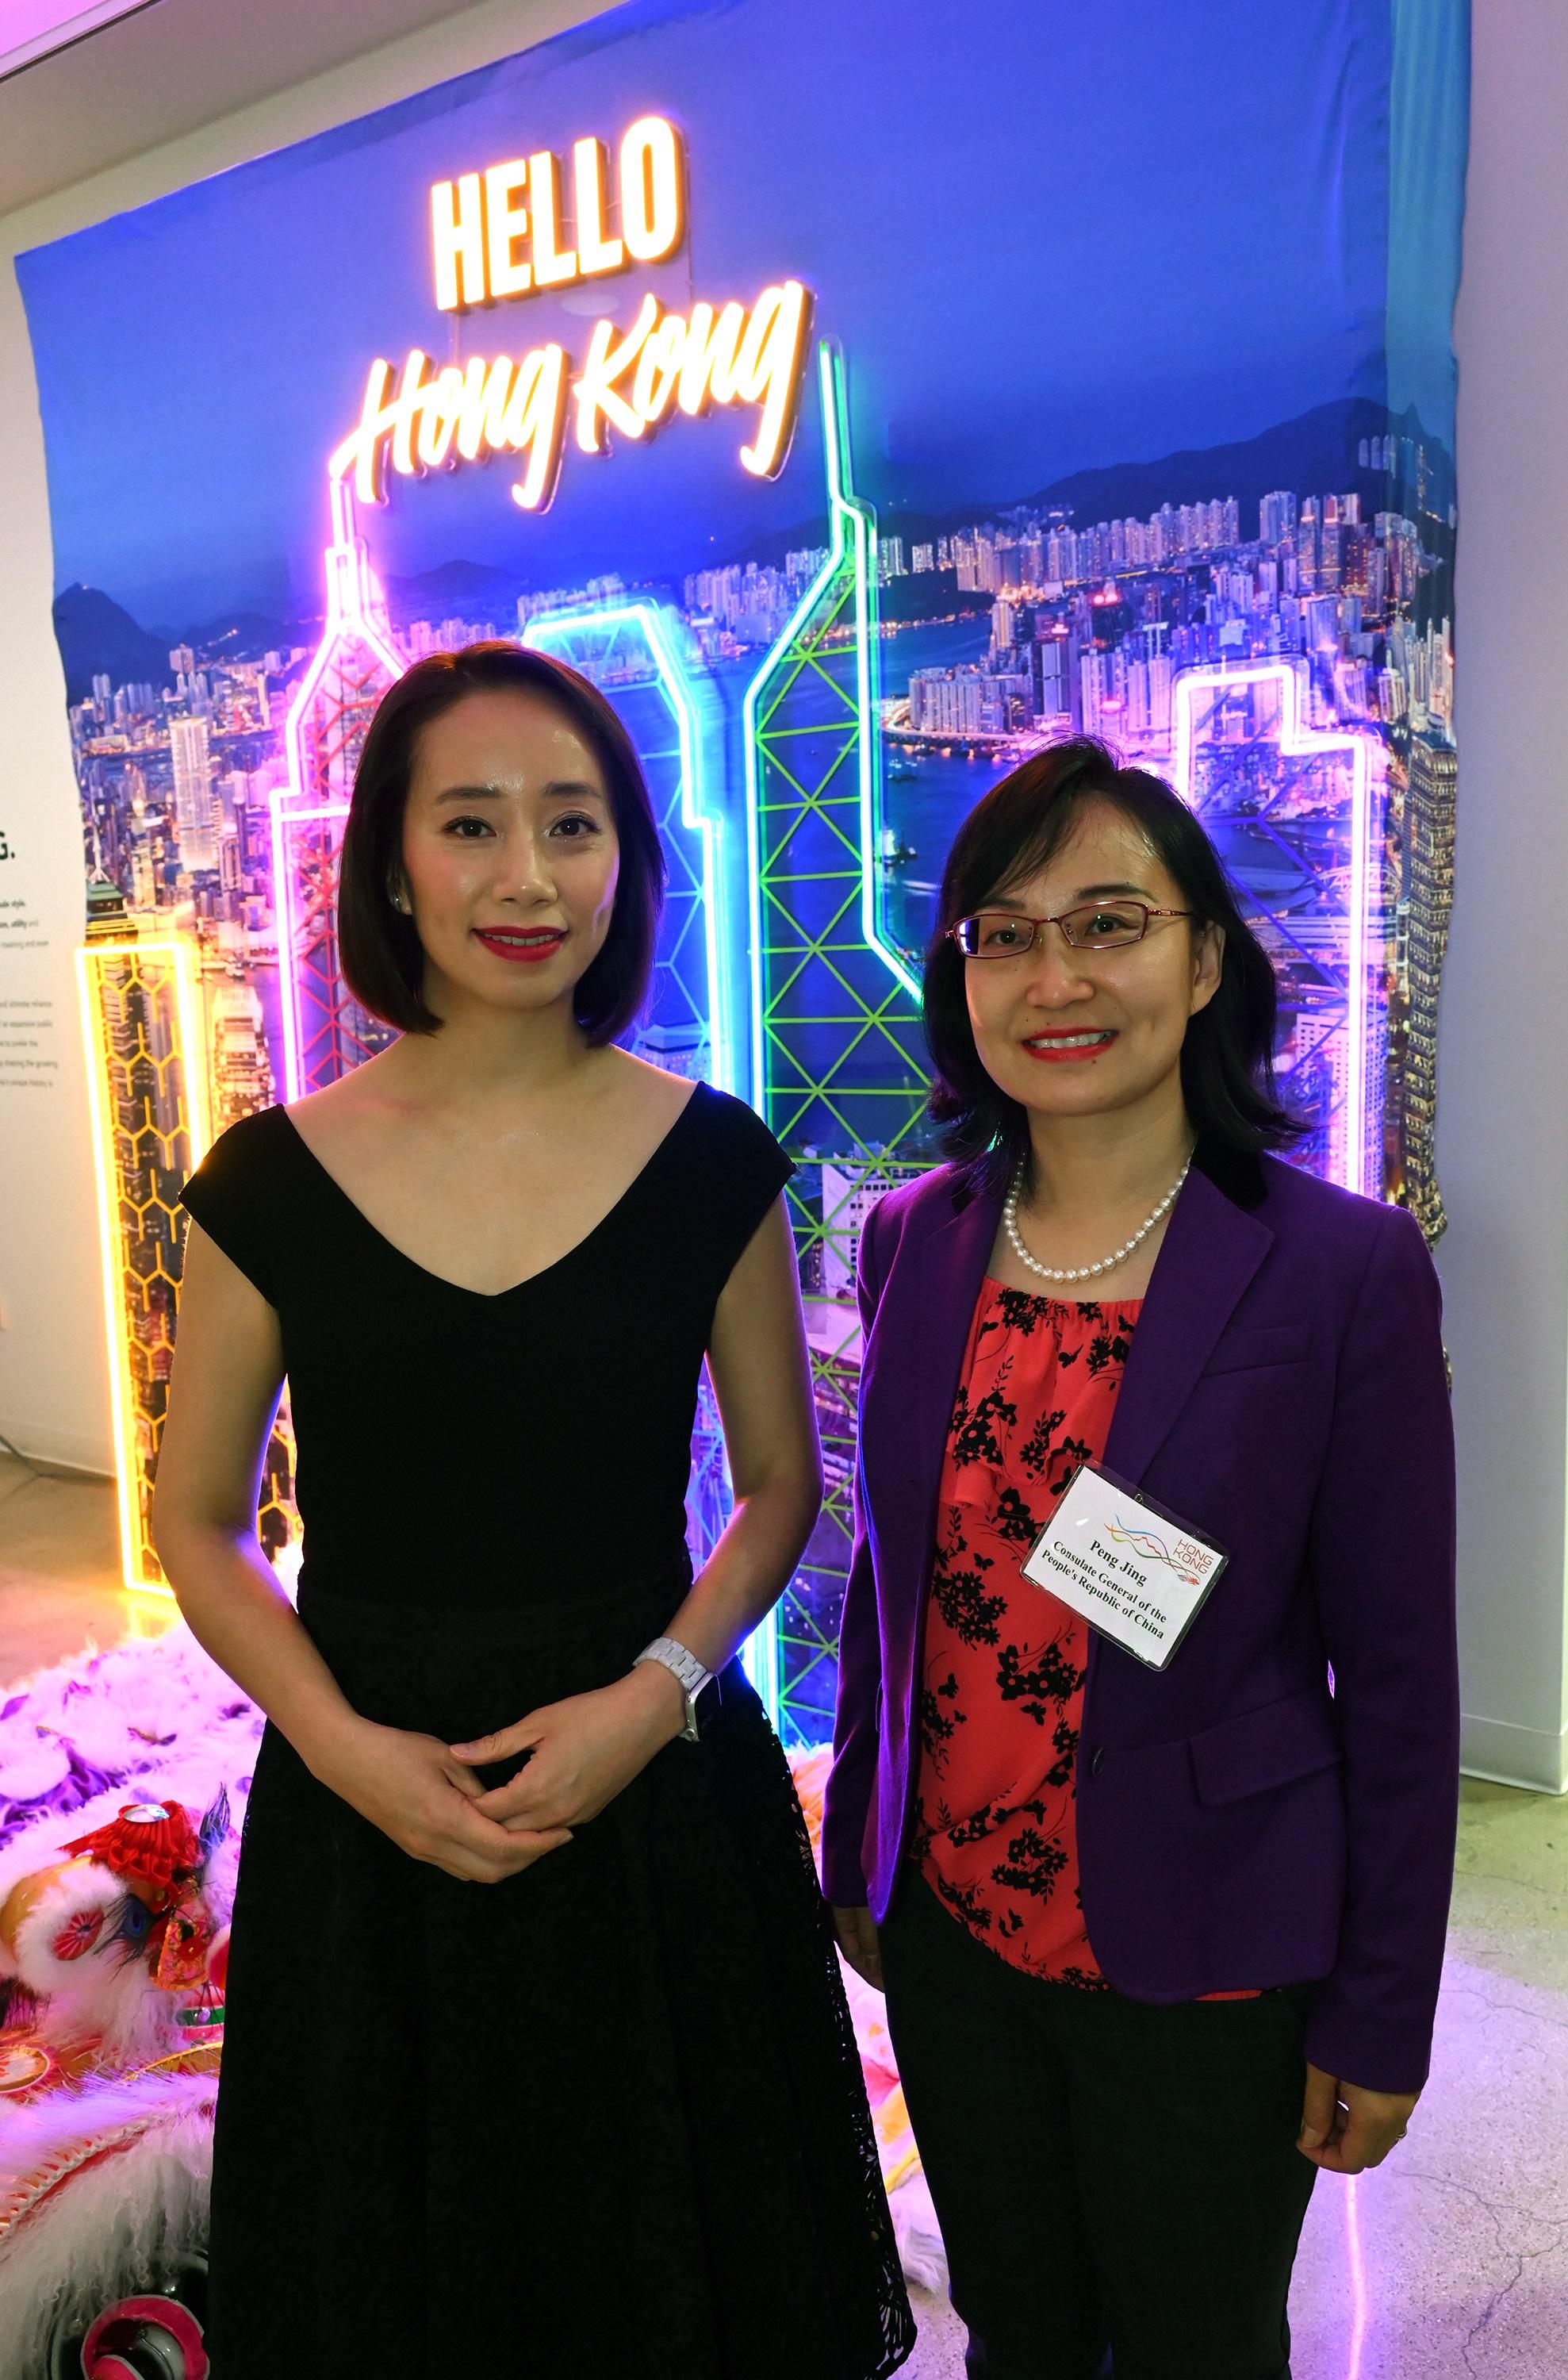 The Hong Kong Economic and Trade Office in San Francisco (HKETO San Francisco) hosted a spring reception celebrating the Year of the Dragon in Los Angeles, California, on March 6 (Los Angeles time). Photo shows the Director of the HKETO San Francisco, Ms Jacko Tsang (left), and the Commercial Counselor of the Consulate General of the People's Republic of China in Los Angeles, Ms Peng Jing (right), before an eye-dotting ceremony at the reception.